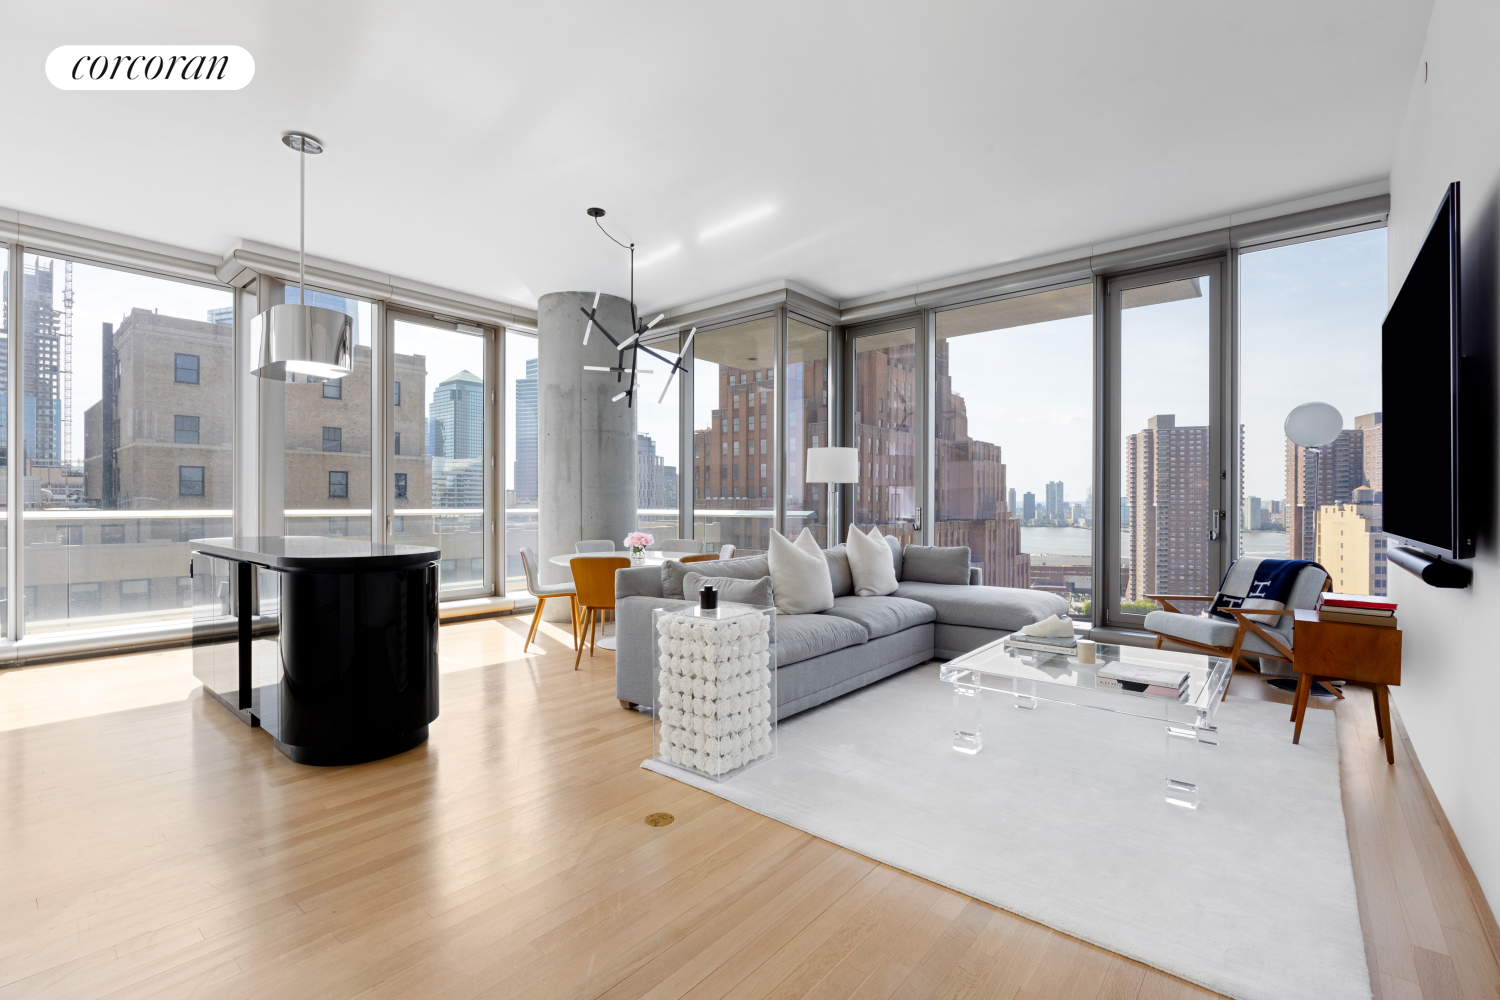 56 Leonard Street 20Aw, Tribeca, Downtown, NYC - 2 Bedrooms  
2.5 Bathrooms  
3 Rooms - 